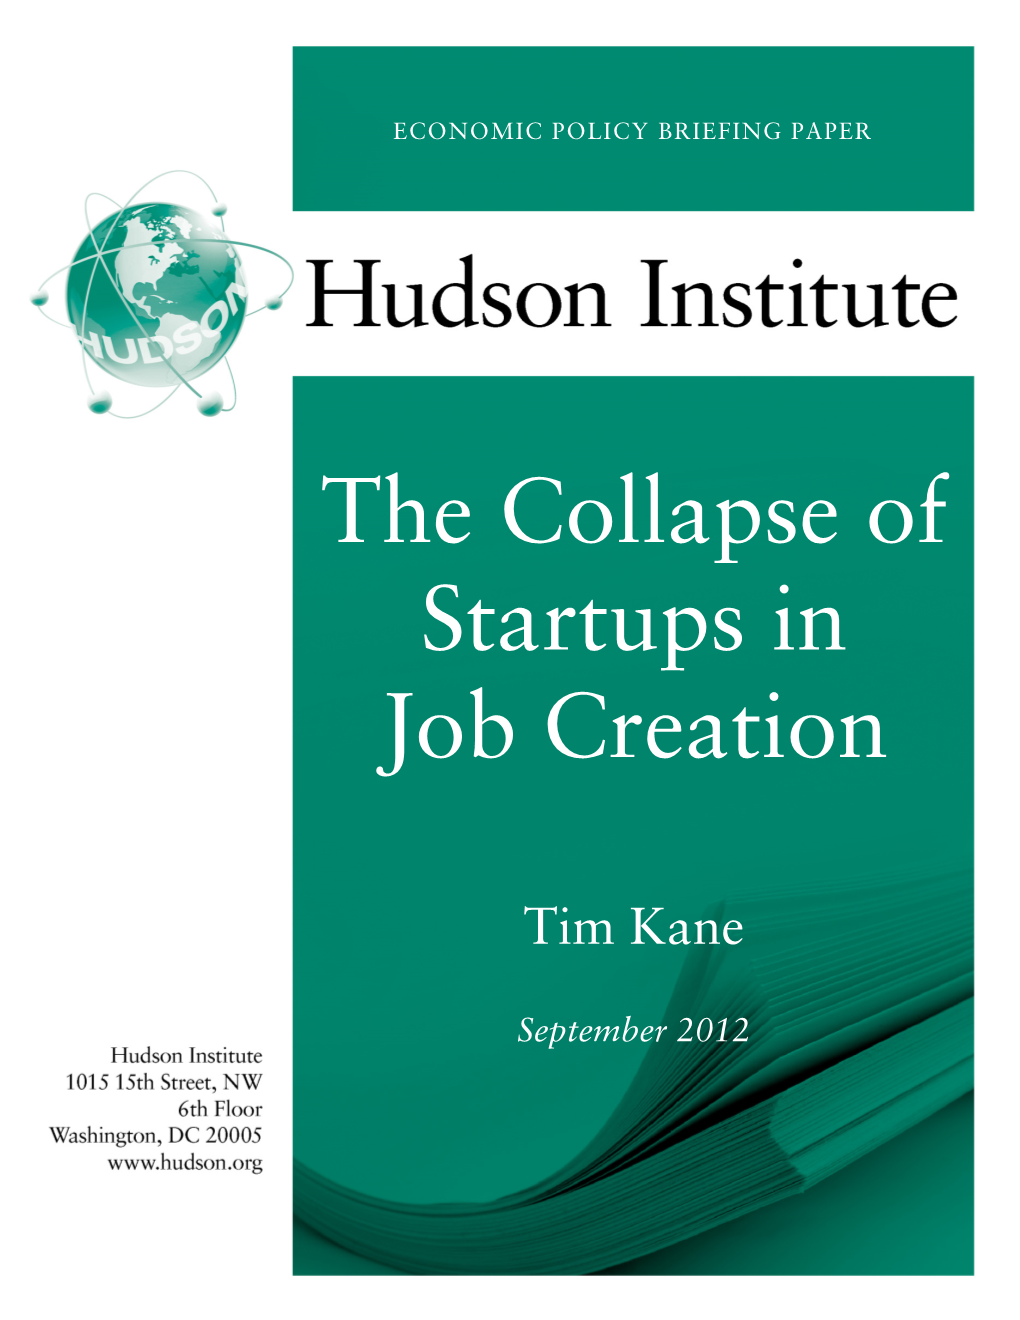 The Collapse of Startups in Job Creation